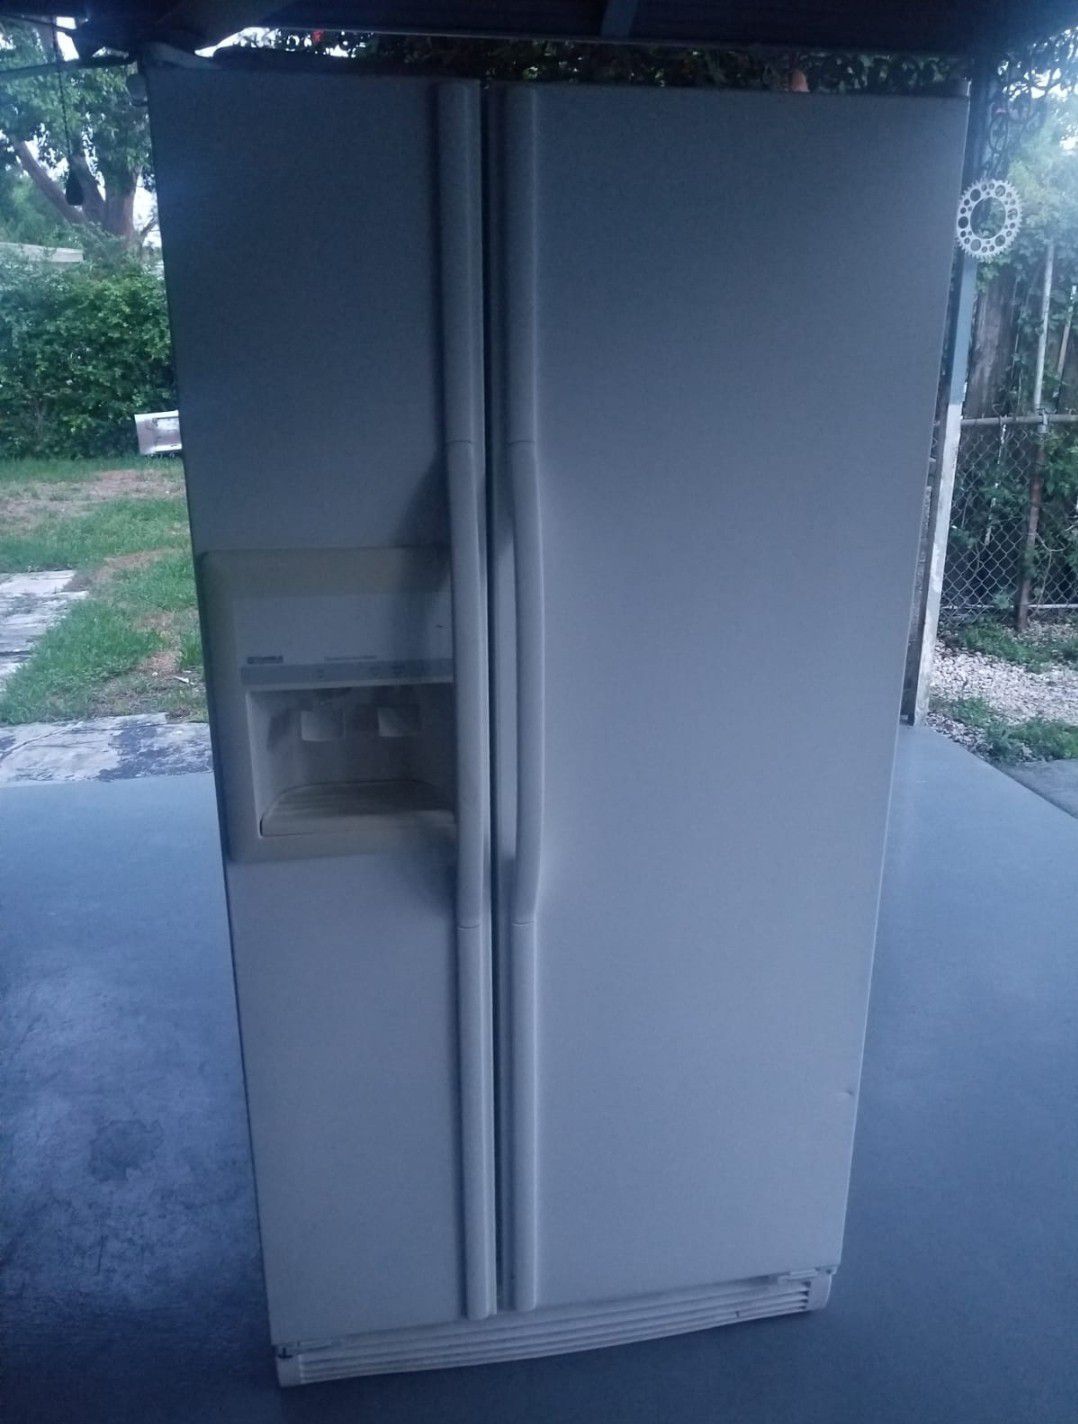 Works Perfectly fridge and freezer side by side Was $3000 new!